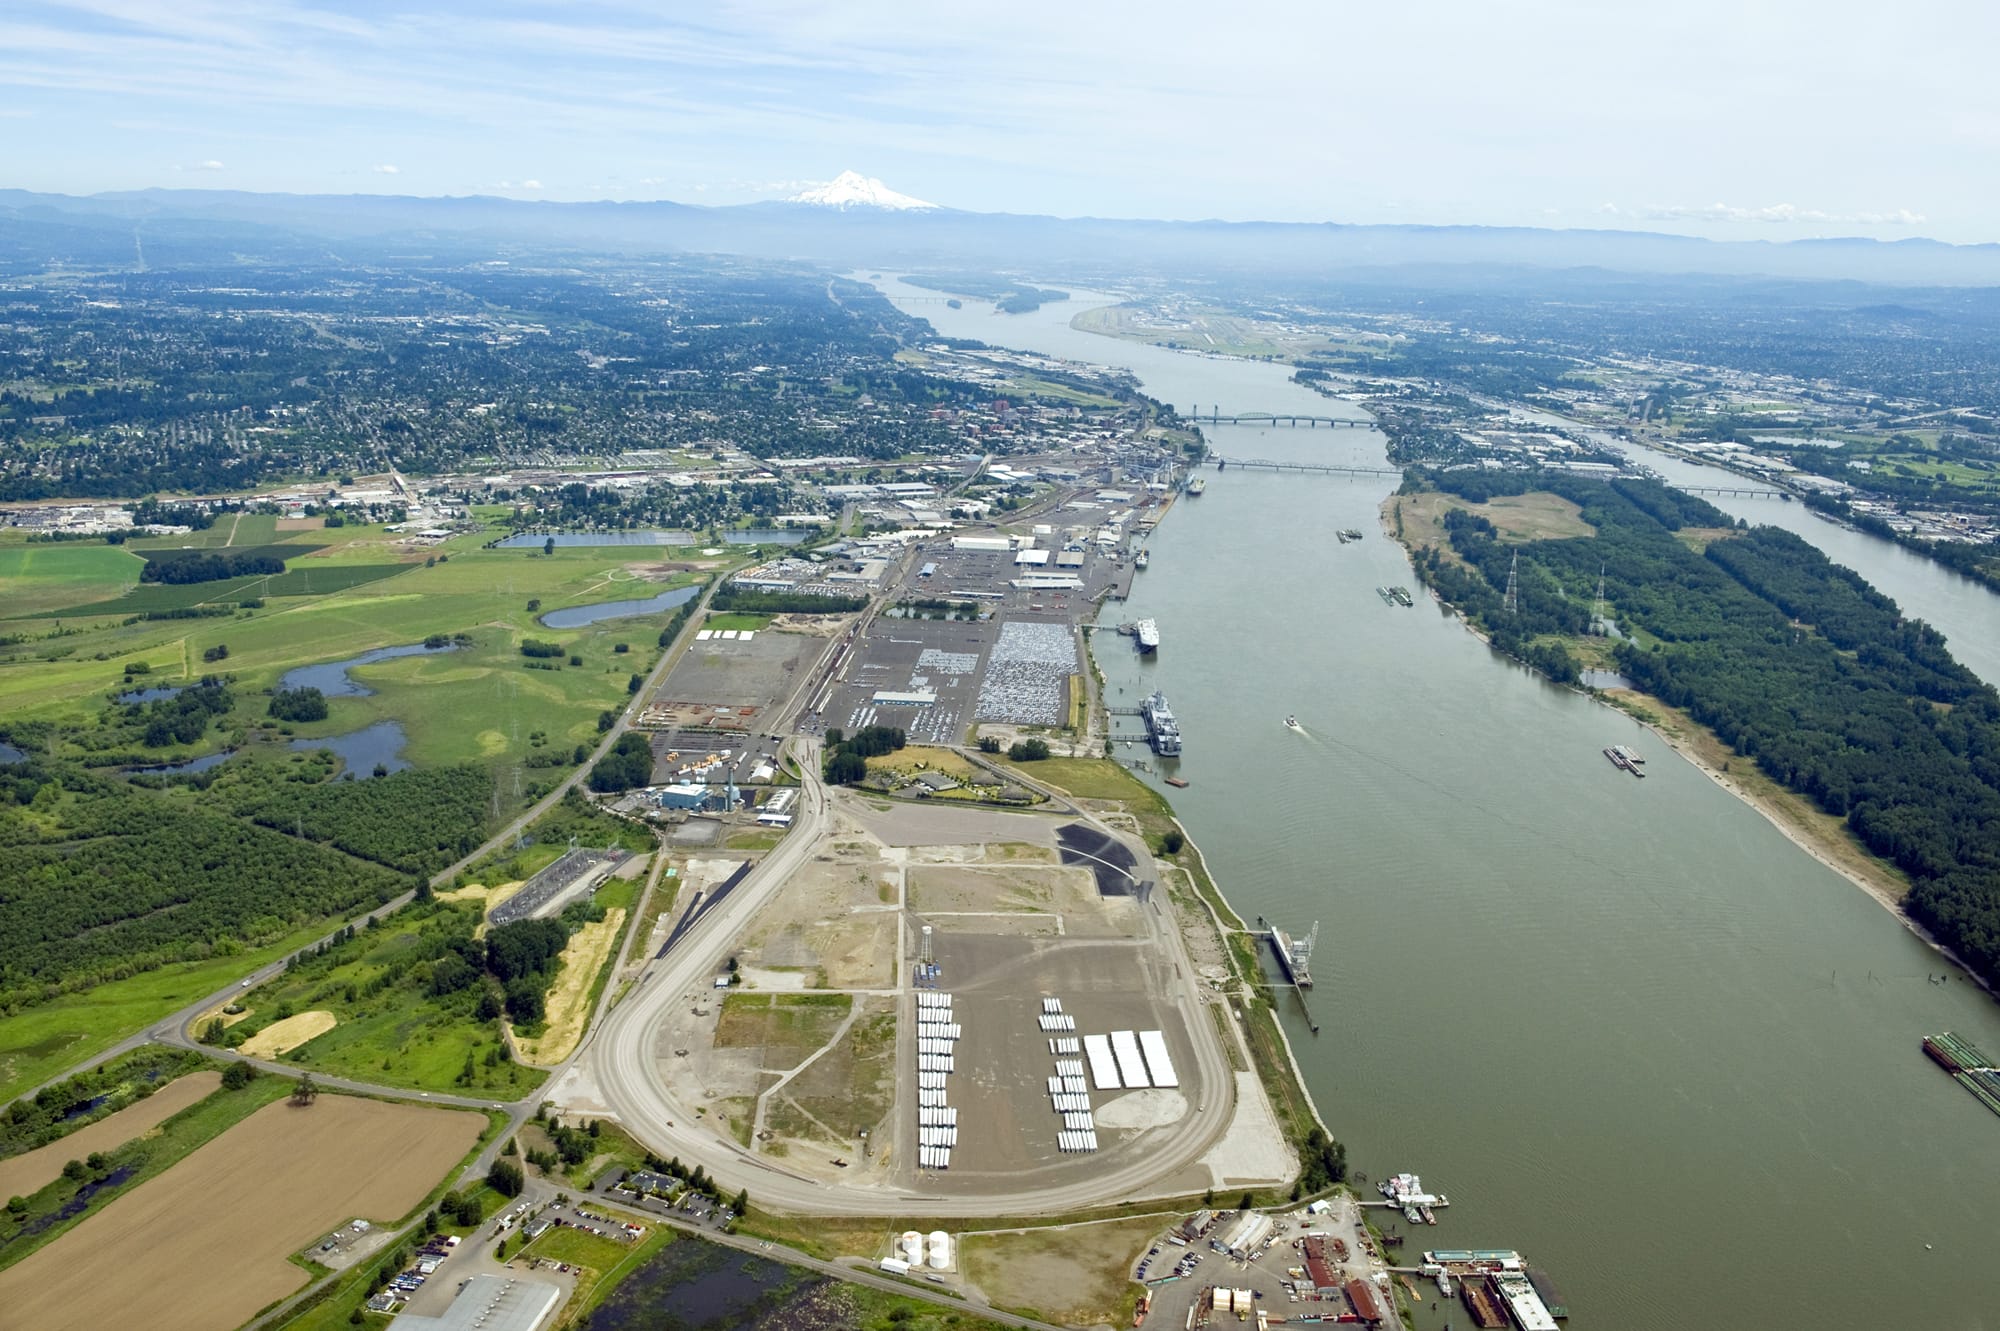 A lucrative deal to export potash, a crop nutrient, on roughly 45 acres of Terminal 5, pictured above, at the Port of Vancouver is off after more than three years of negotiations, including a preliminary agreement, failed to secure a final lease accord.